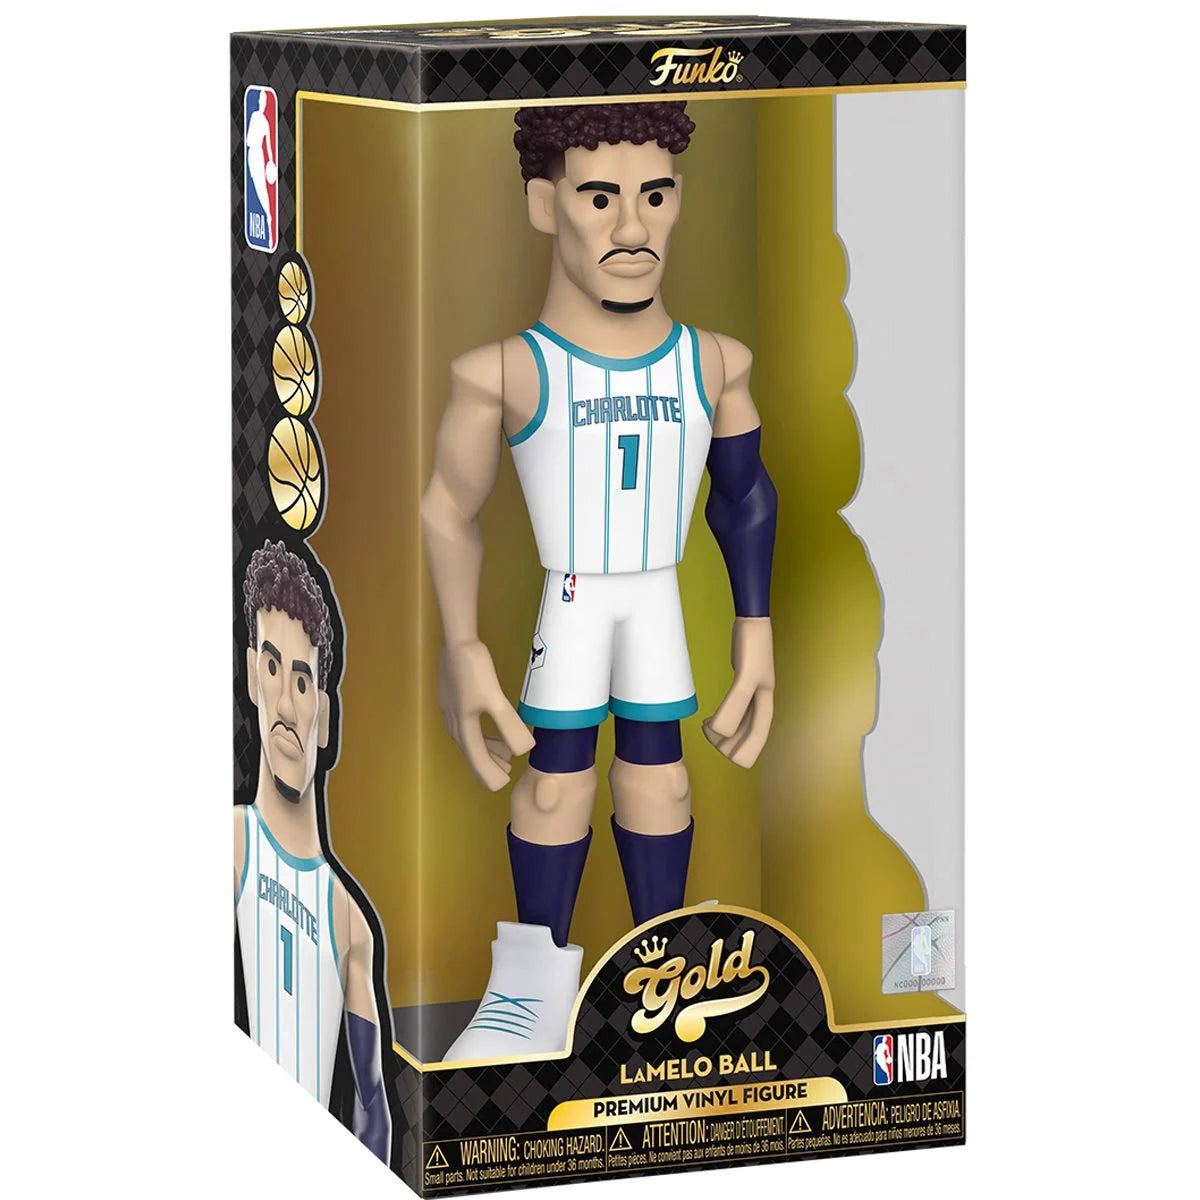 Lamelo Ball NBA 12-Inch Funko Vinyl Gold Figure w/ Chance of chase!